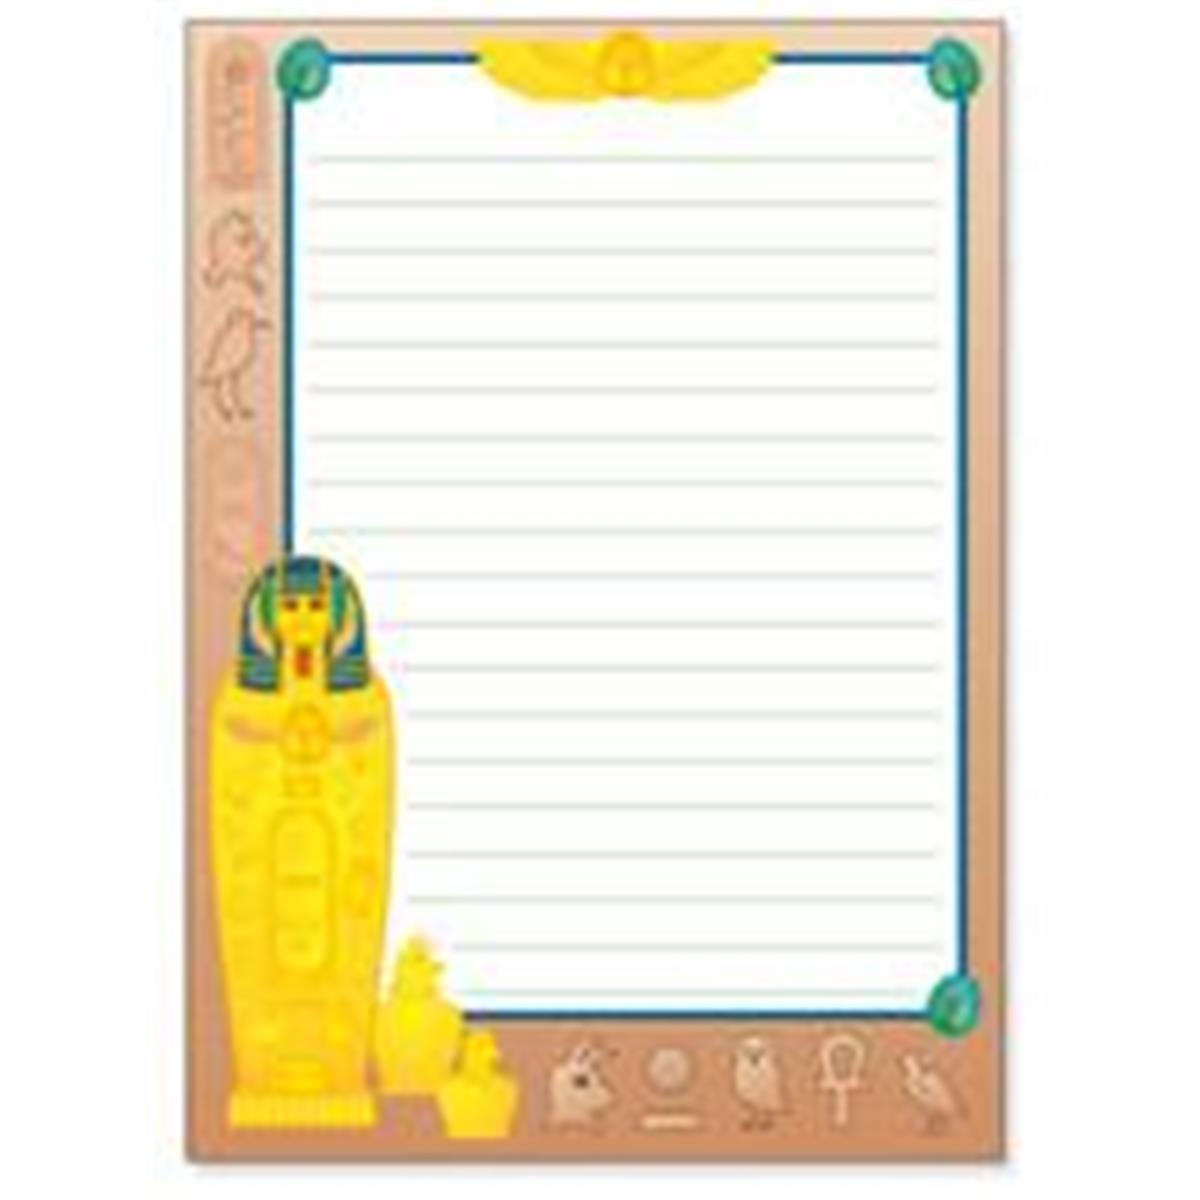 Se-1922 9 X 6 In. Large Lined Notepad, Egyptian - 50 Sheets Per Pack